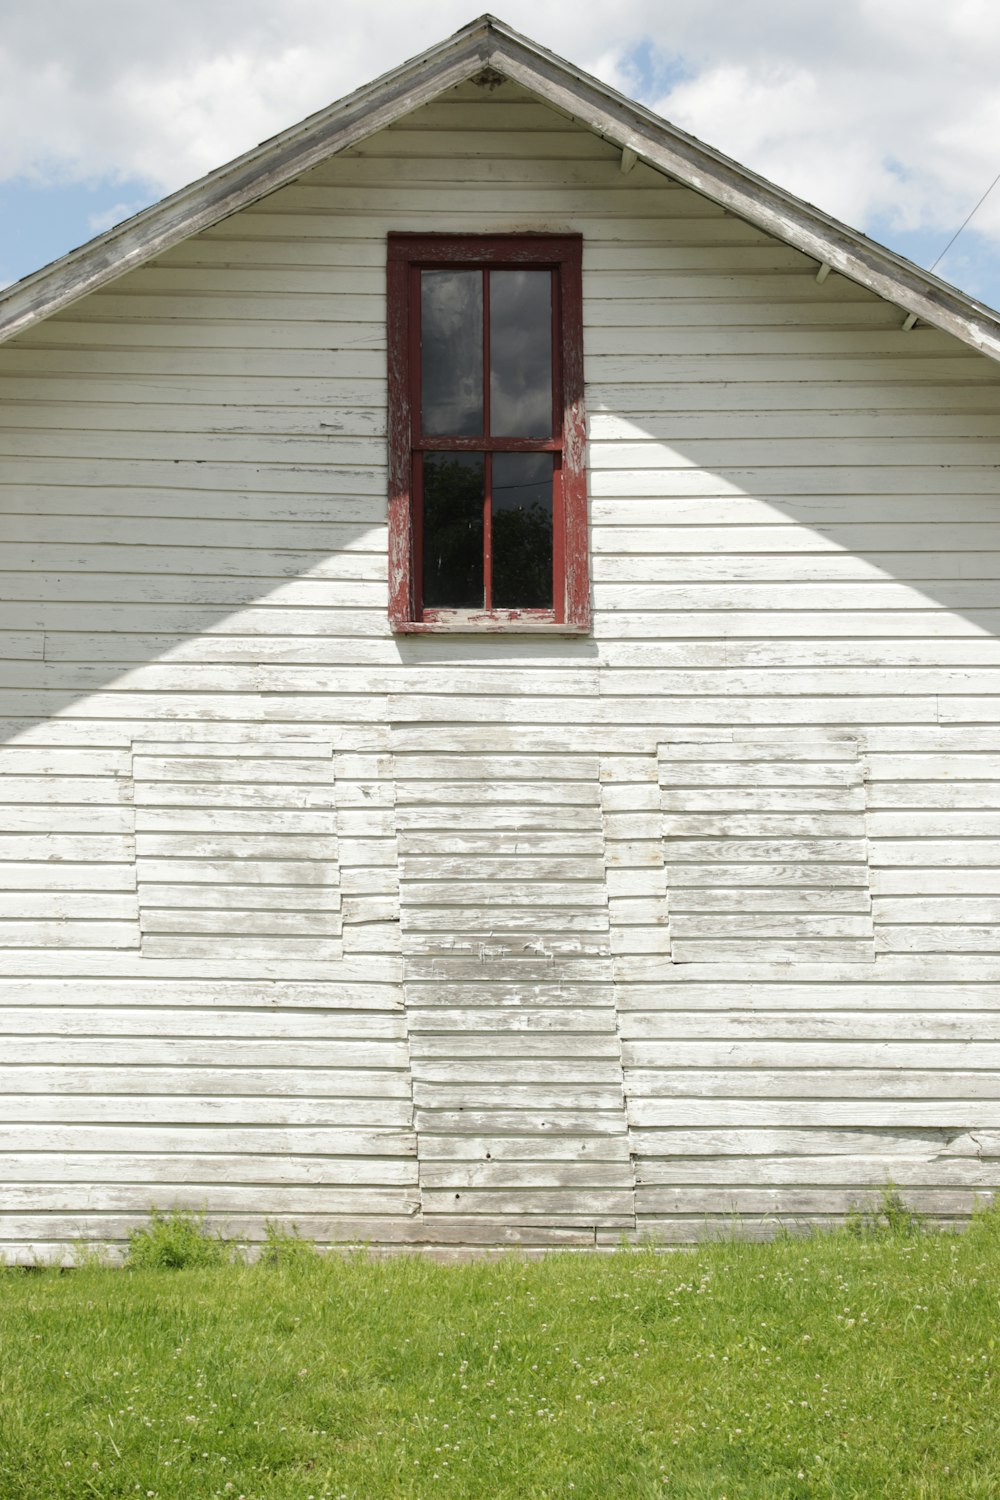 red wooden window on white wooden house